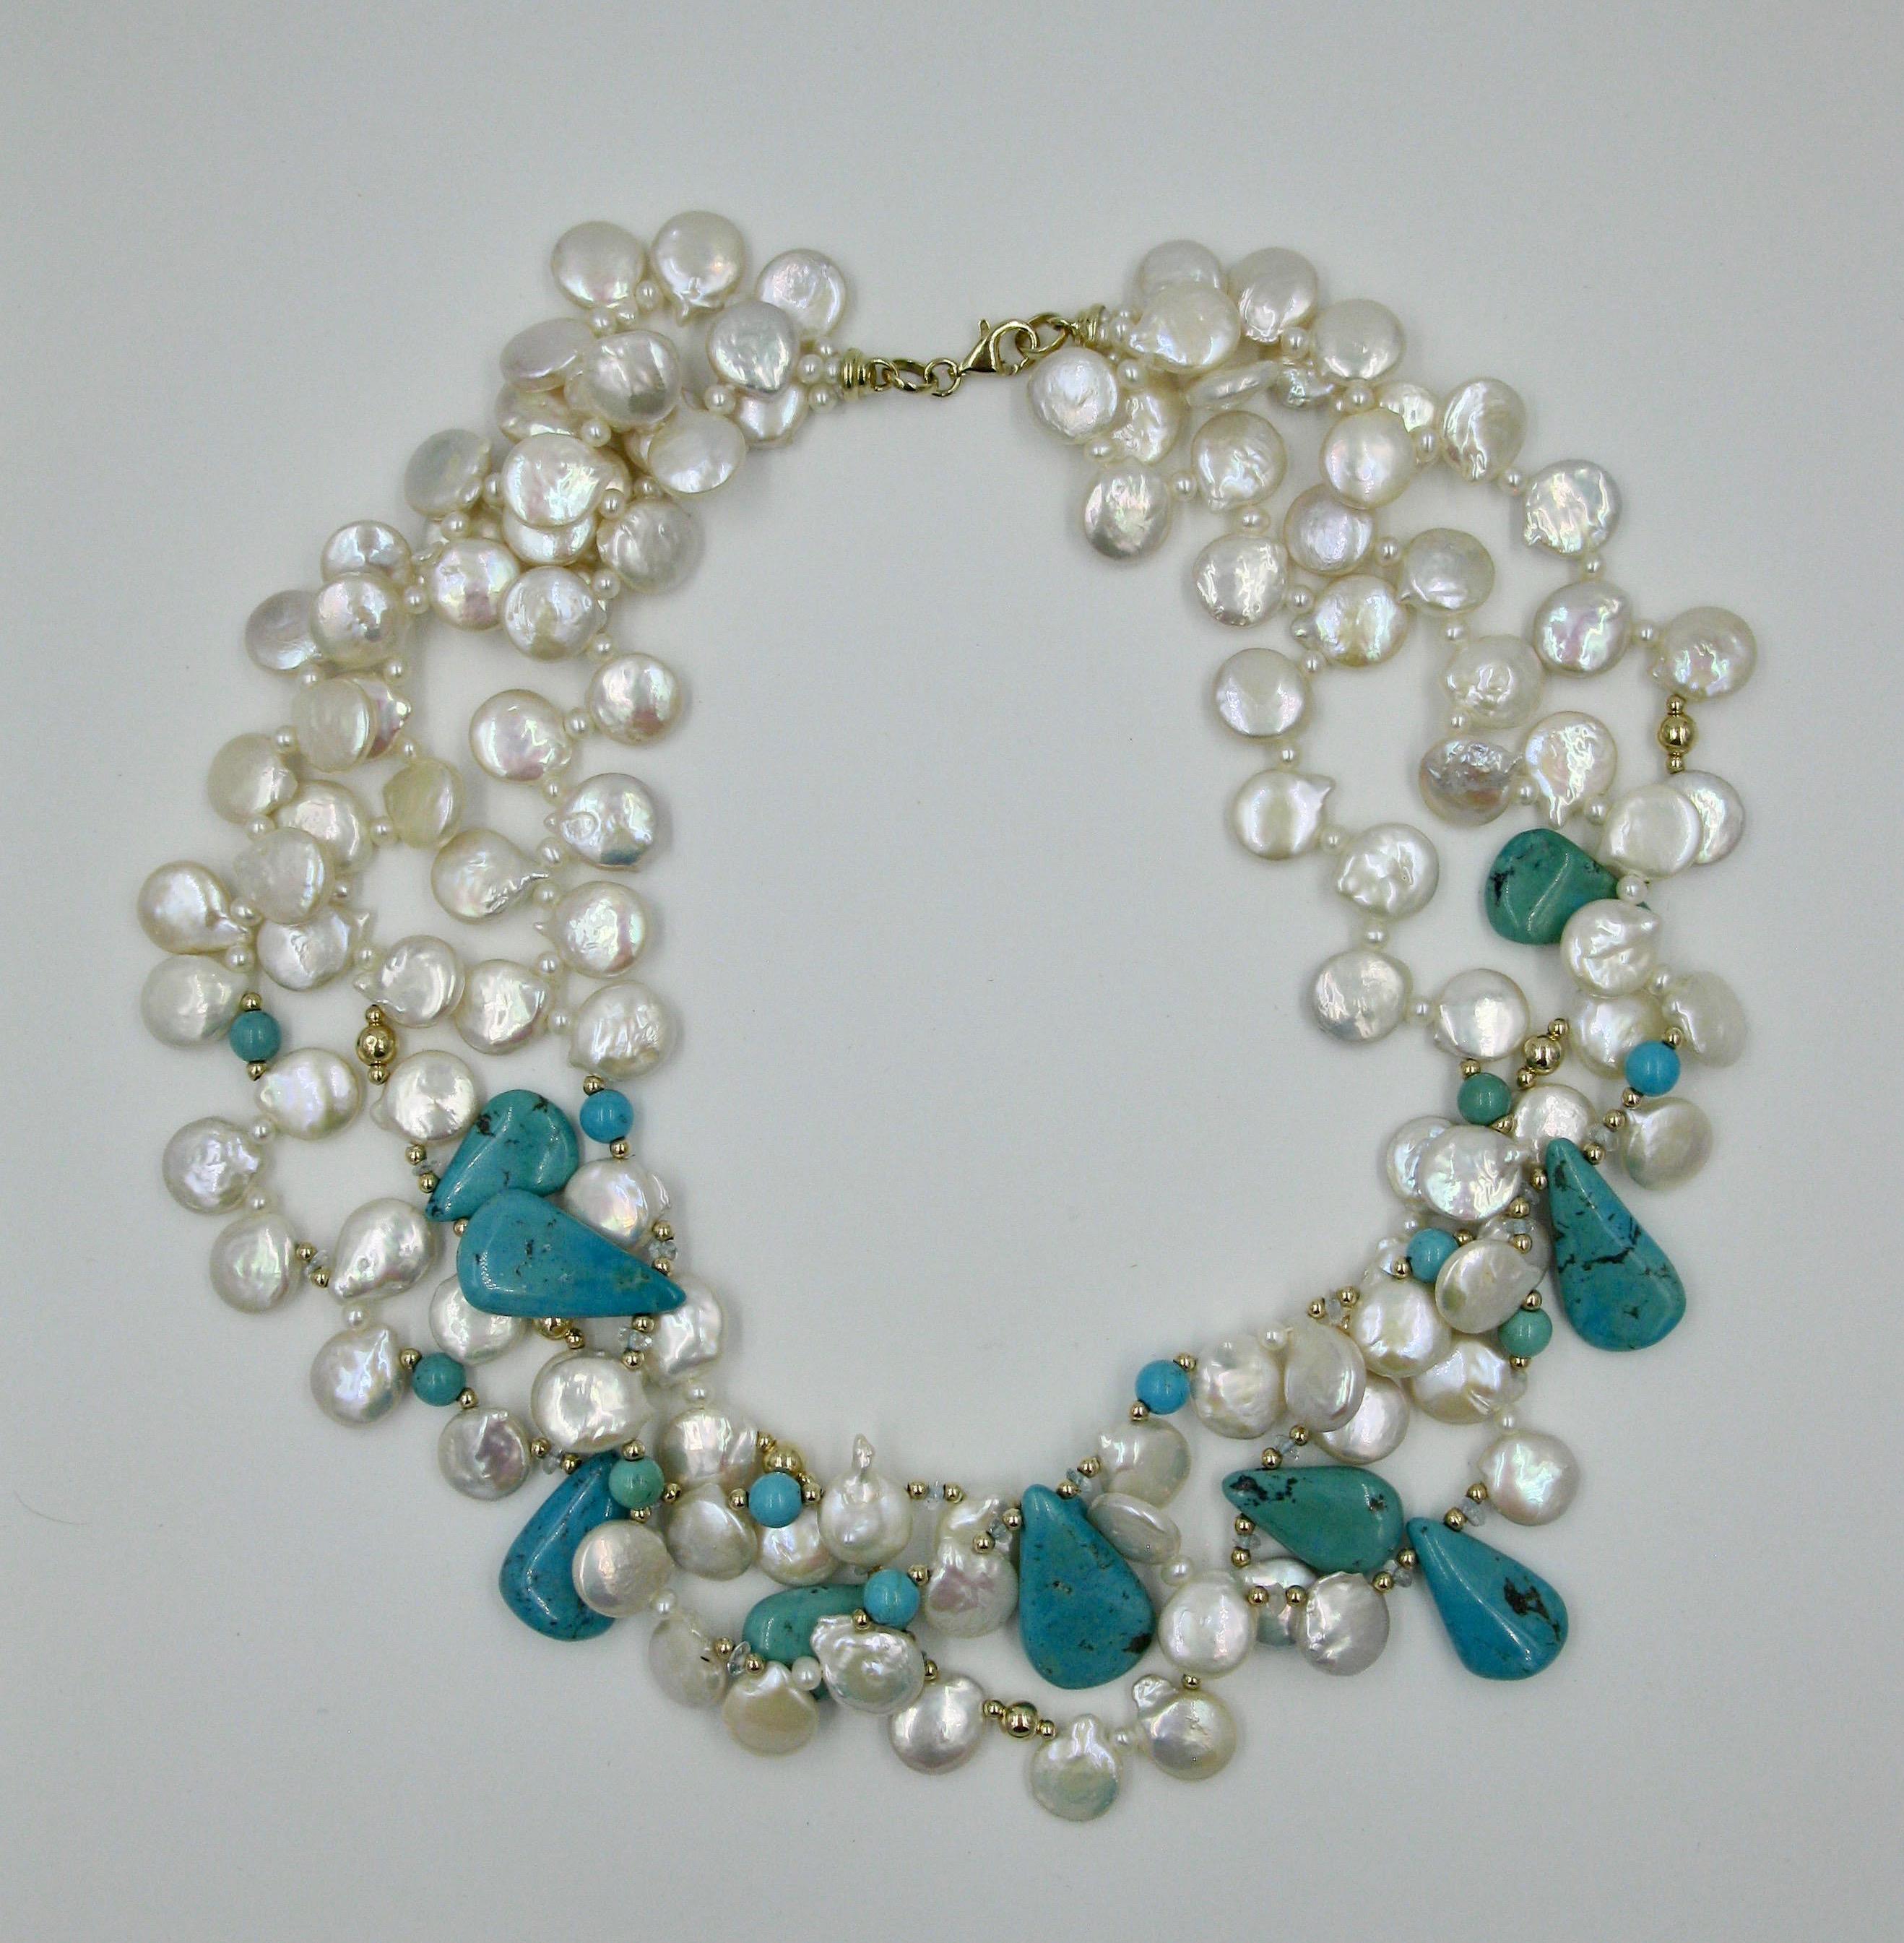 This is a stunning Turquoise and Keshi Pearl triple strand Necklace in 14 Karat Yellow Gold.  The natural mined Turquoise are pear shaped and round with wonderful Sleeping Beauty color and natural striation within the gems.  The turquoise is set